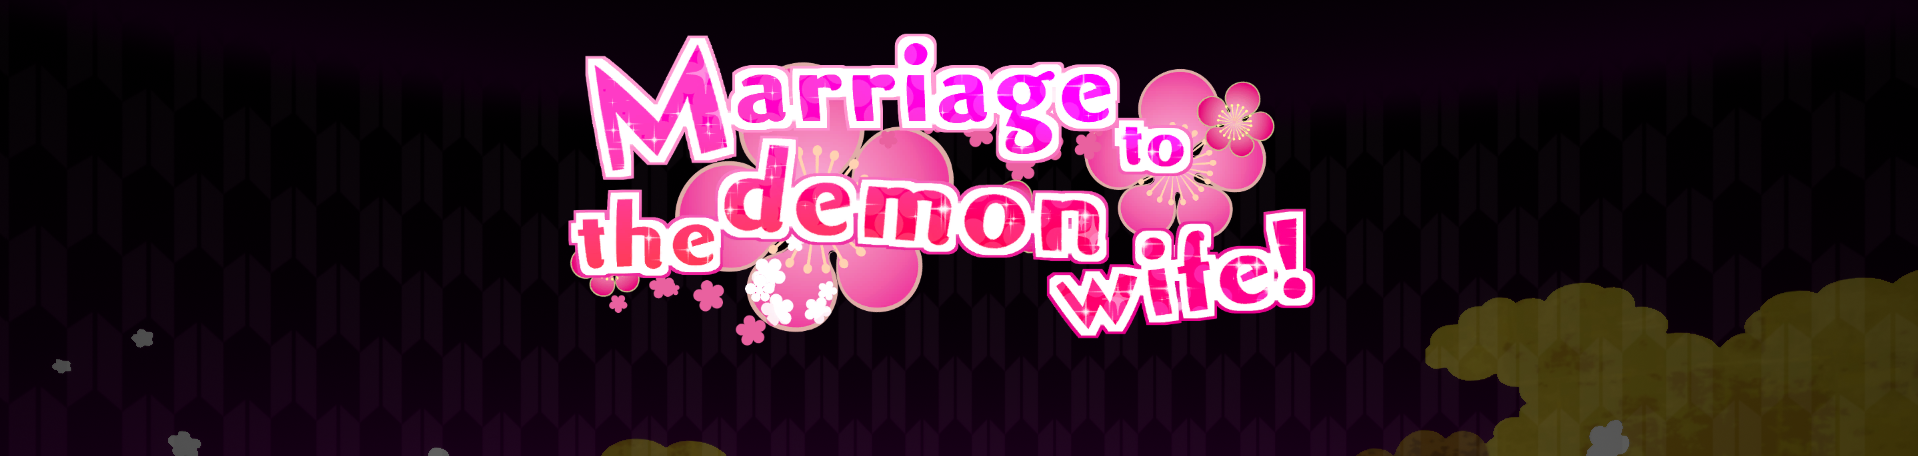 Marriage to the demon wife! poster